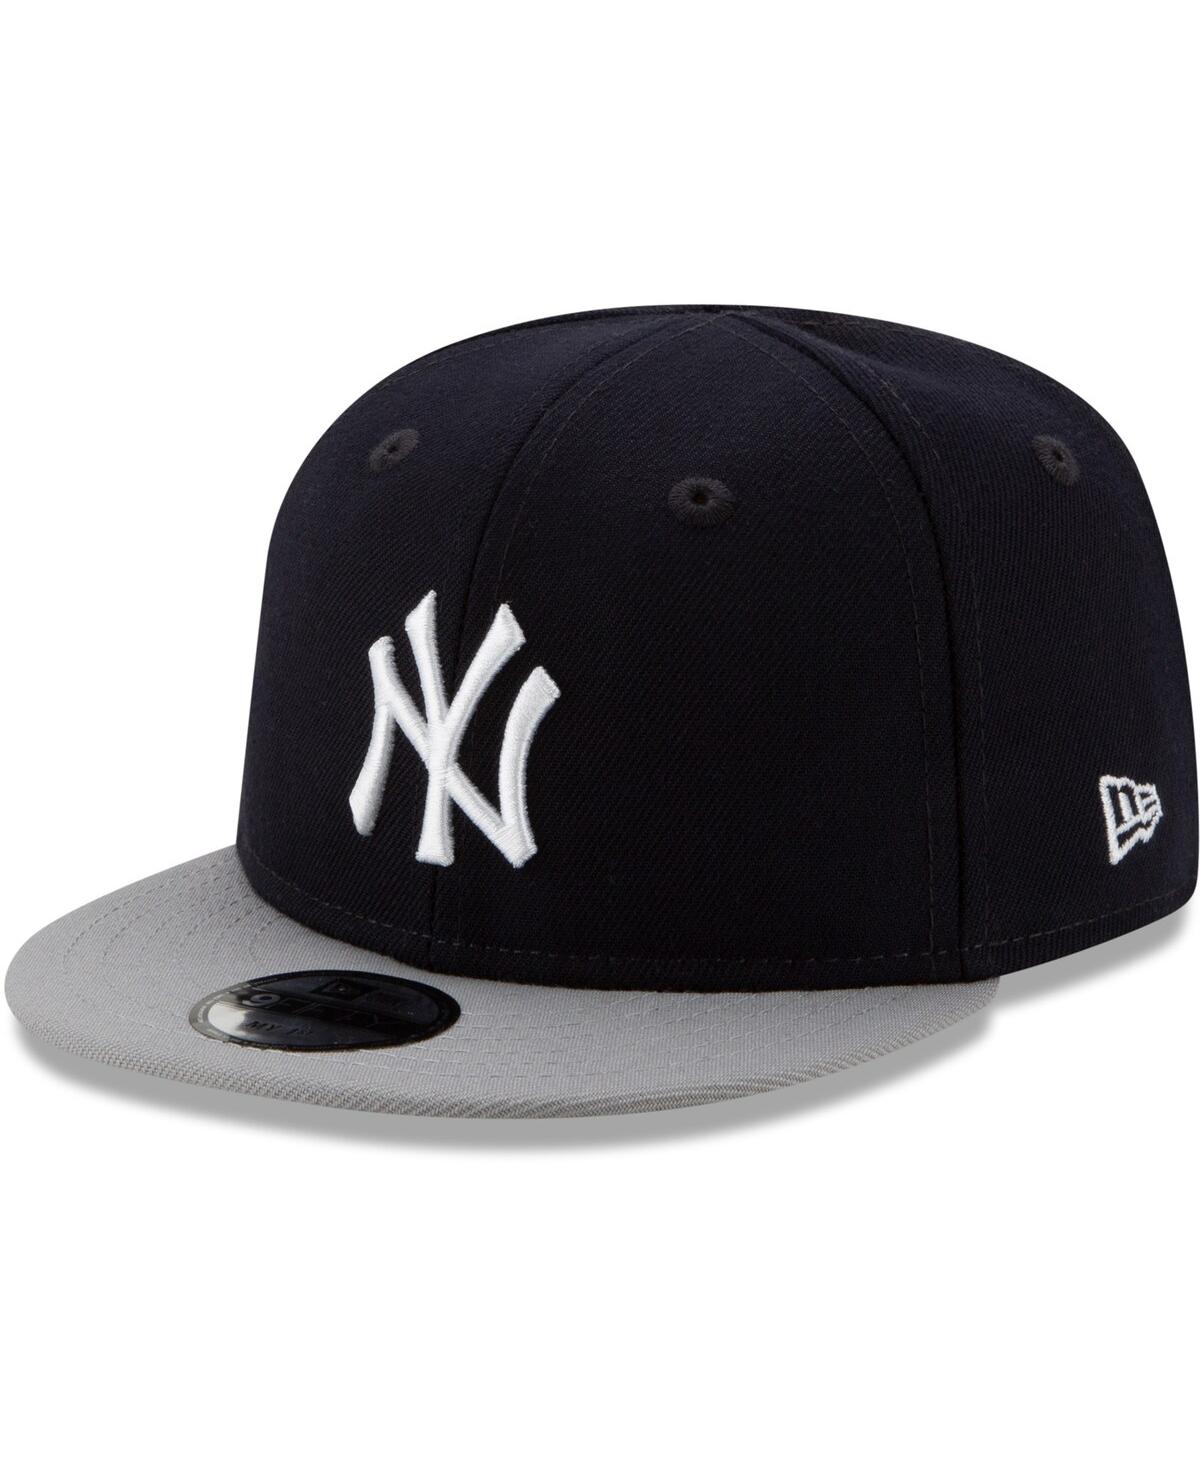 Shop New Era Infant Unisex  Navy New York Yankees My First 9fifty Hat